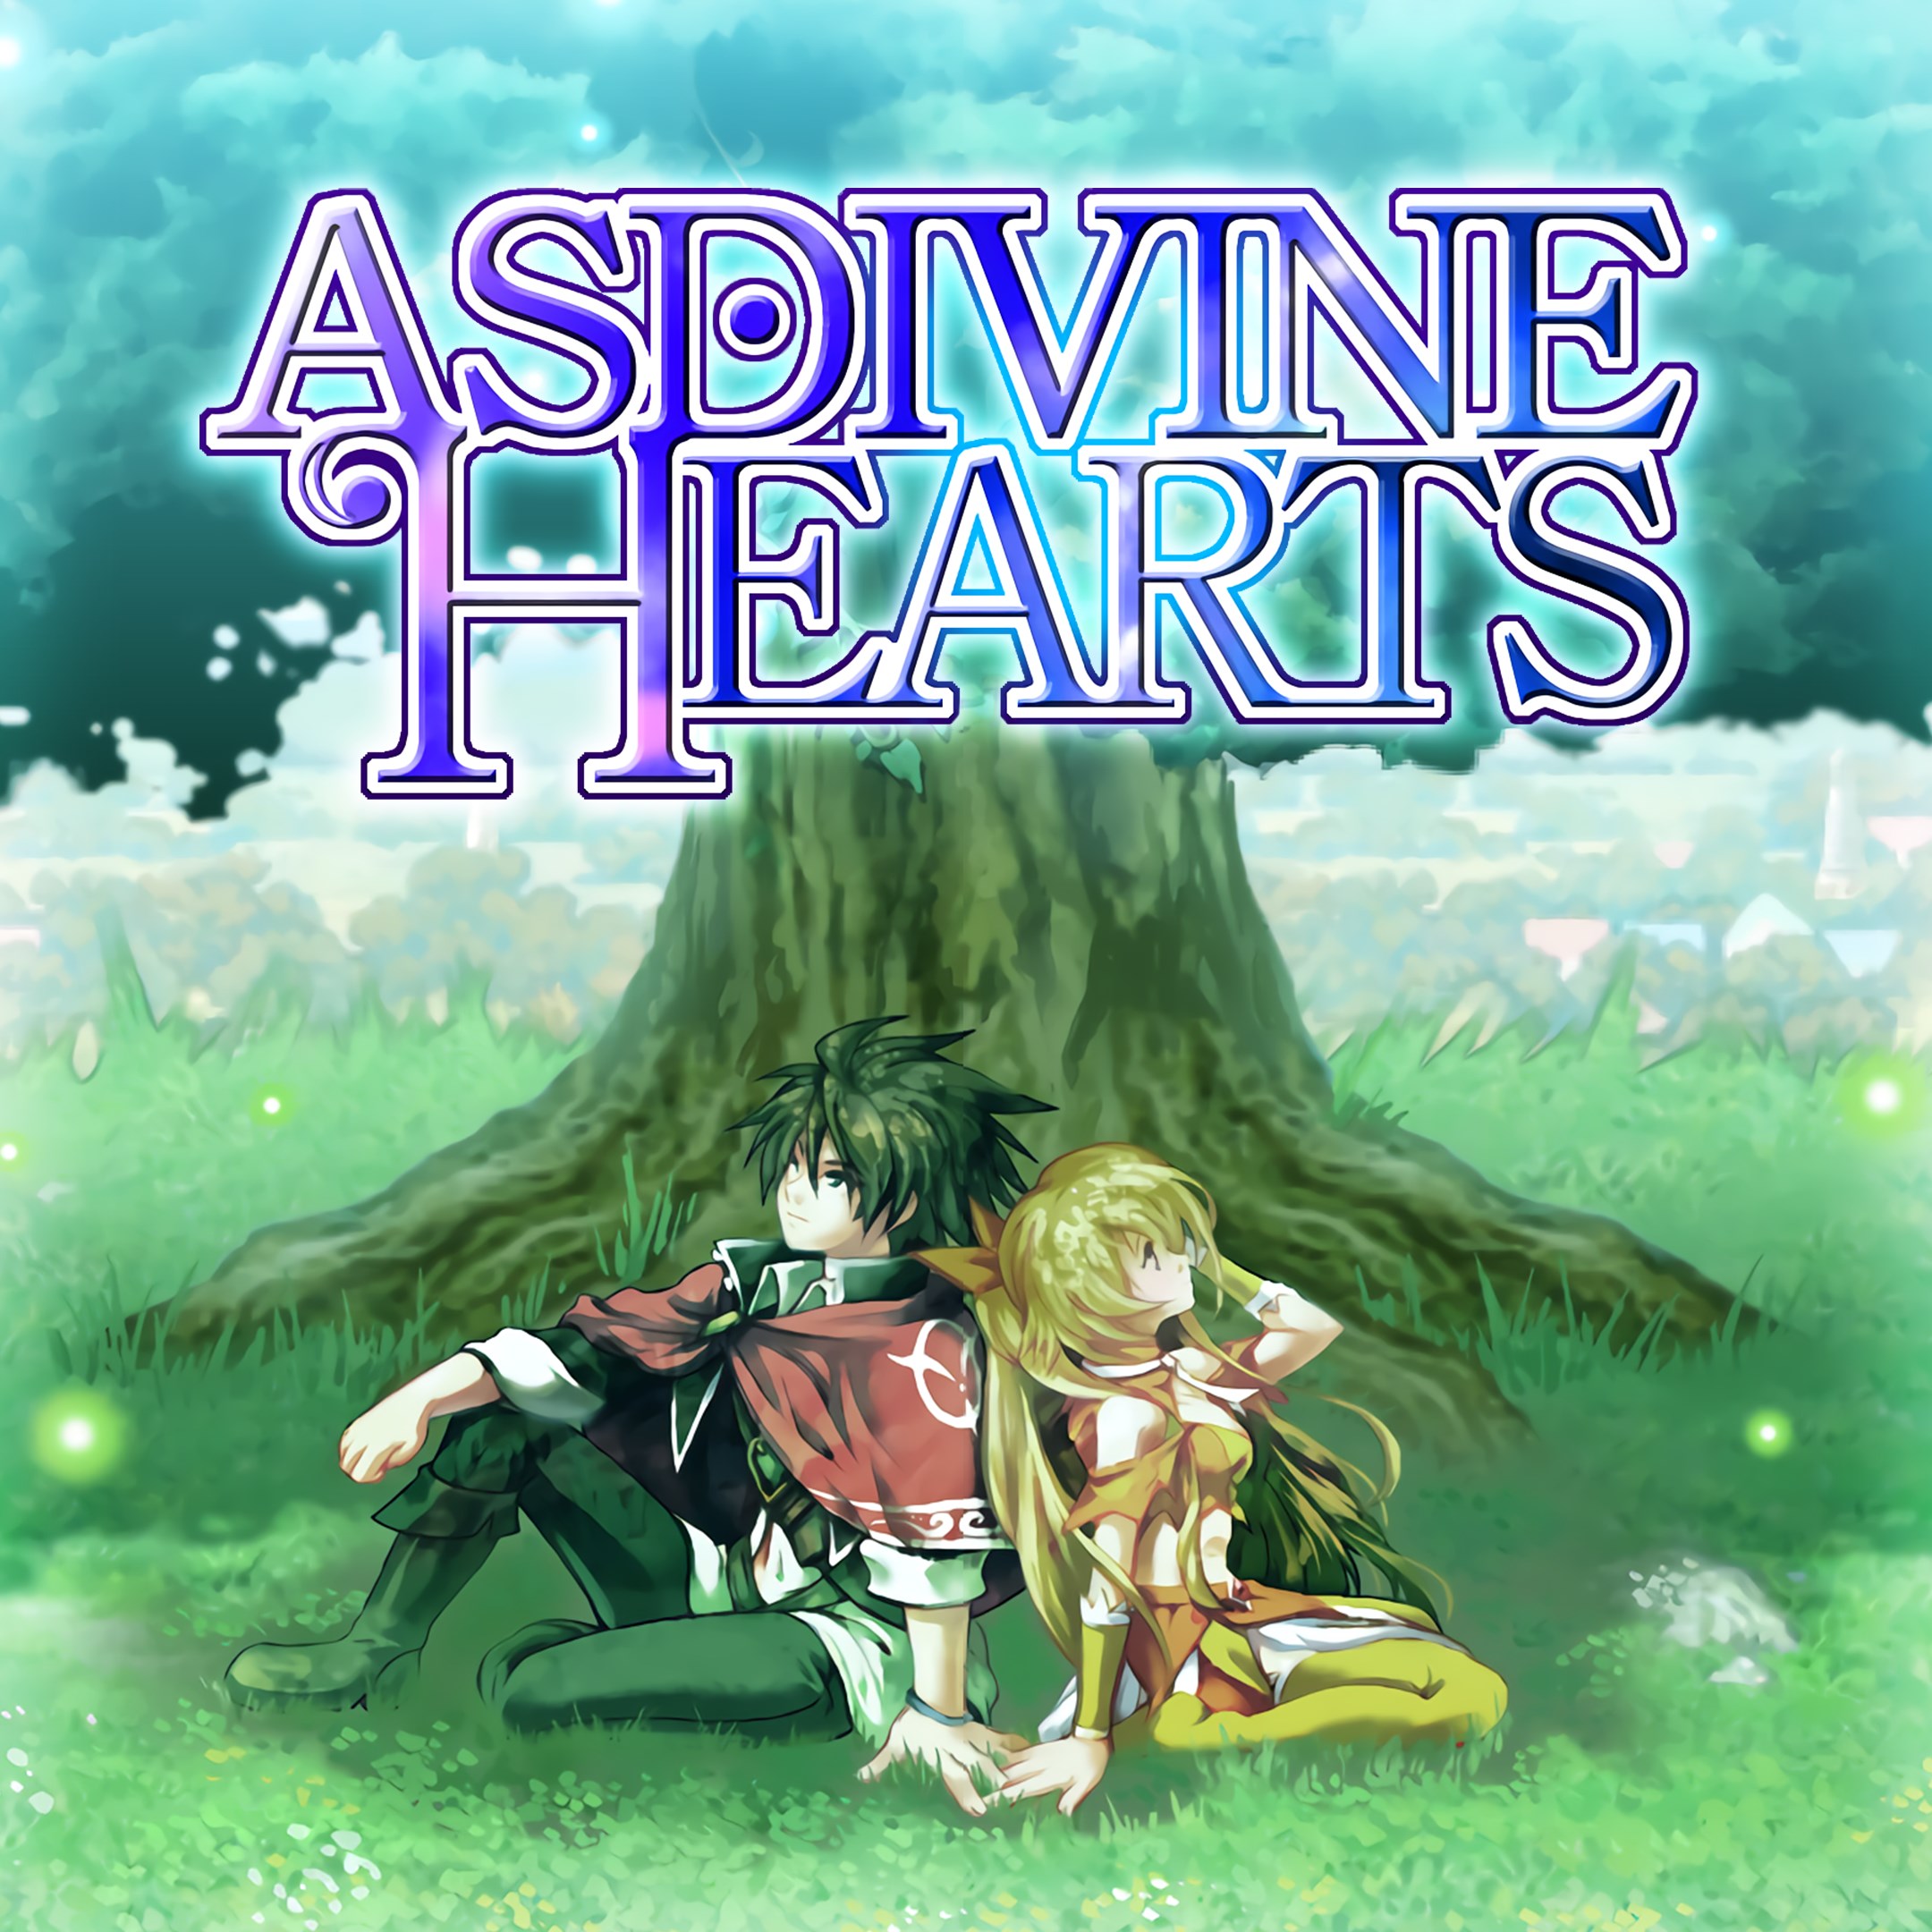 Asdivine Hearts technical specifications for computer